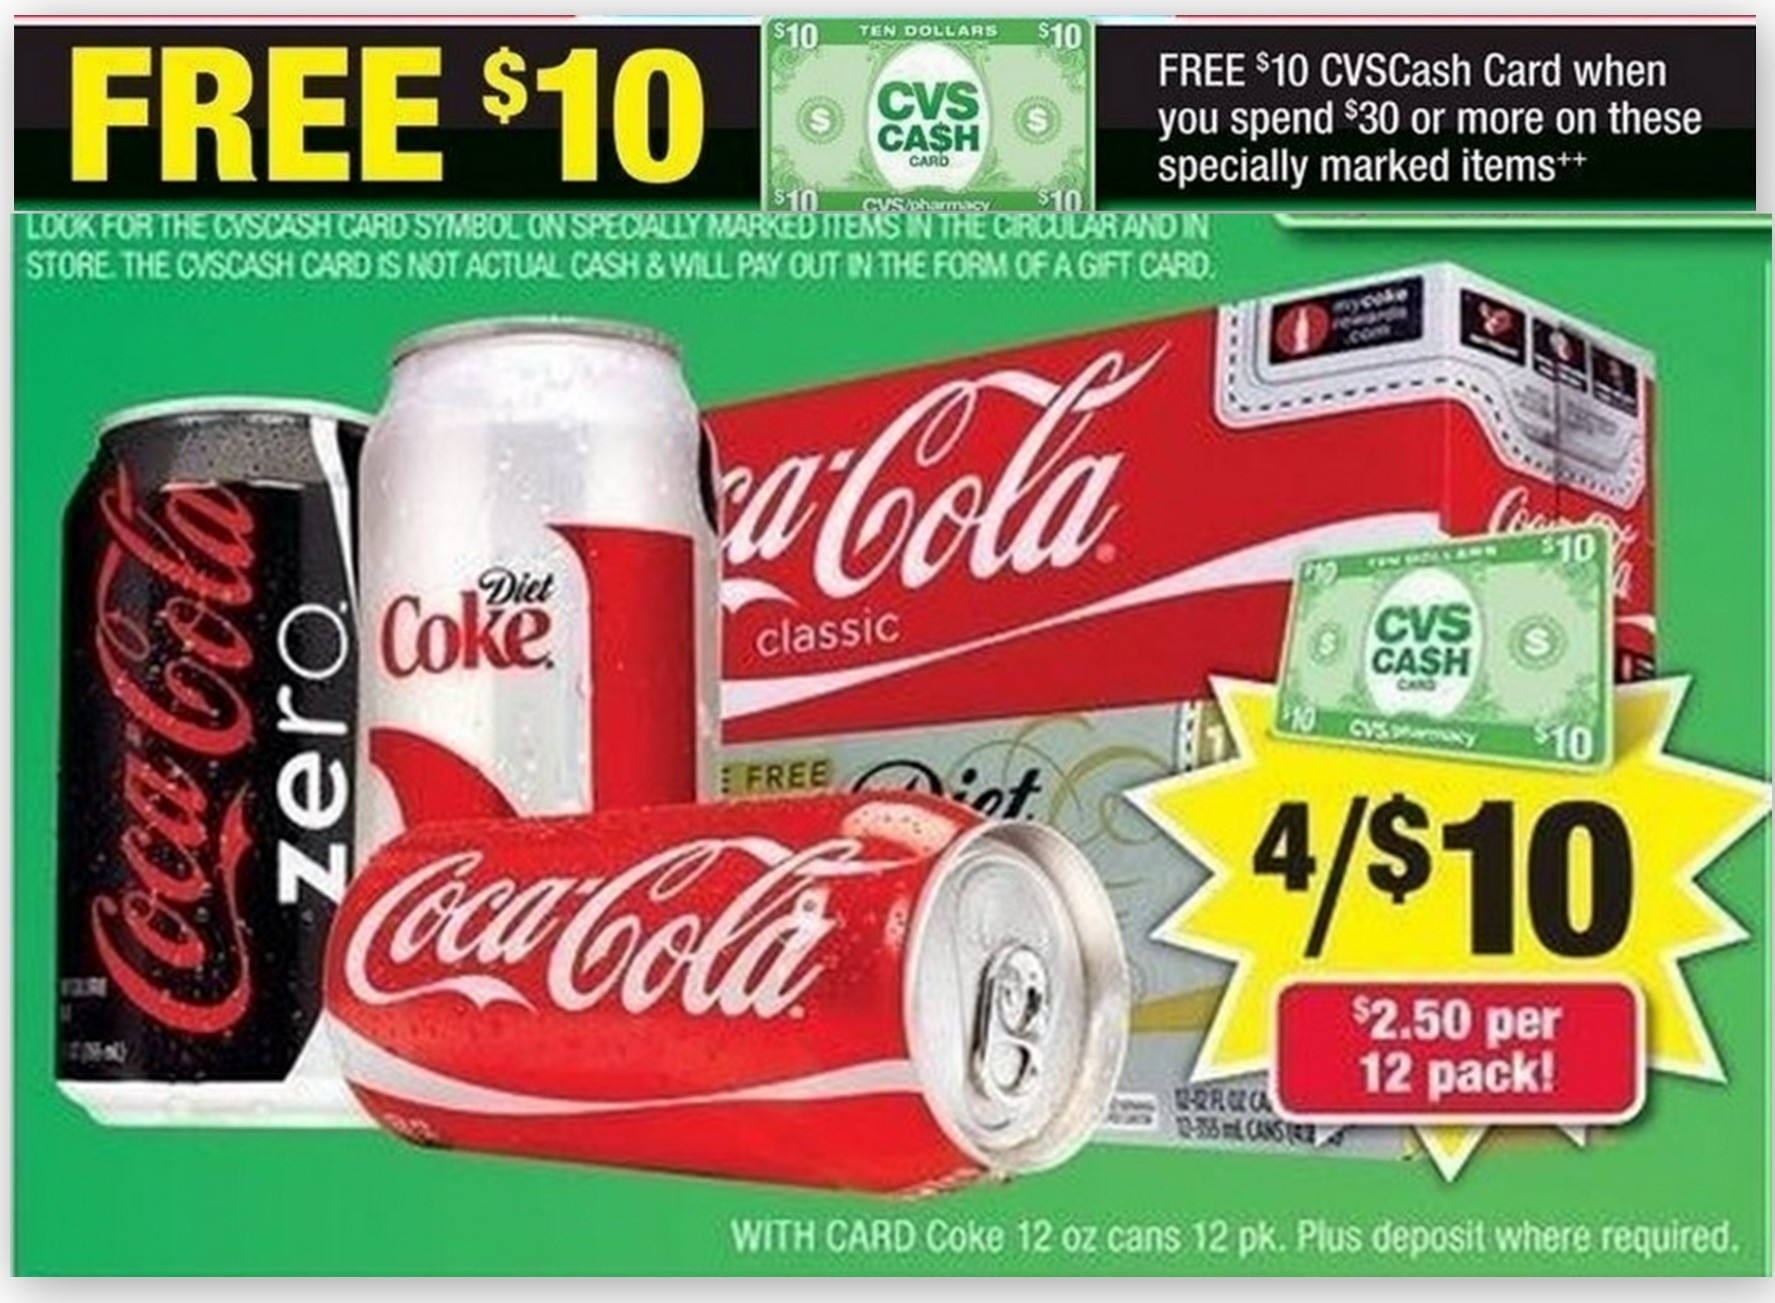 Awesome Deal on Coke Products at CVS Starting 1/20